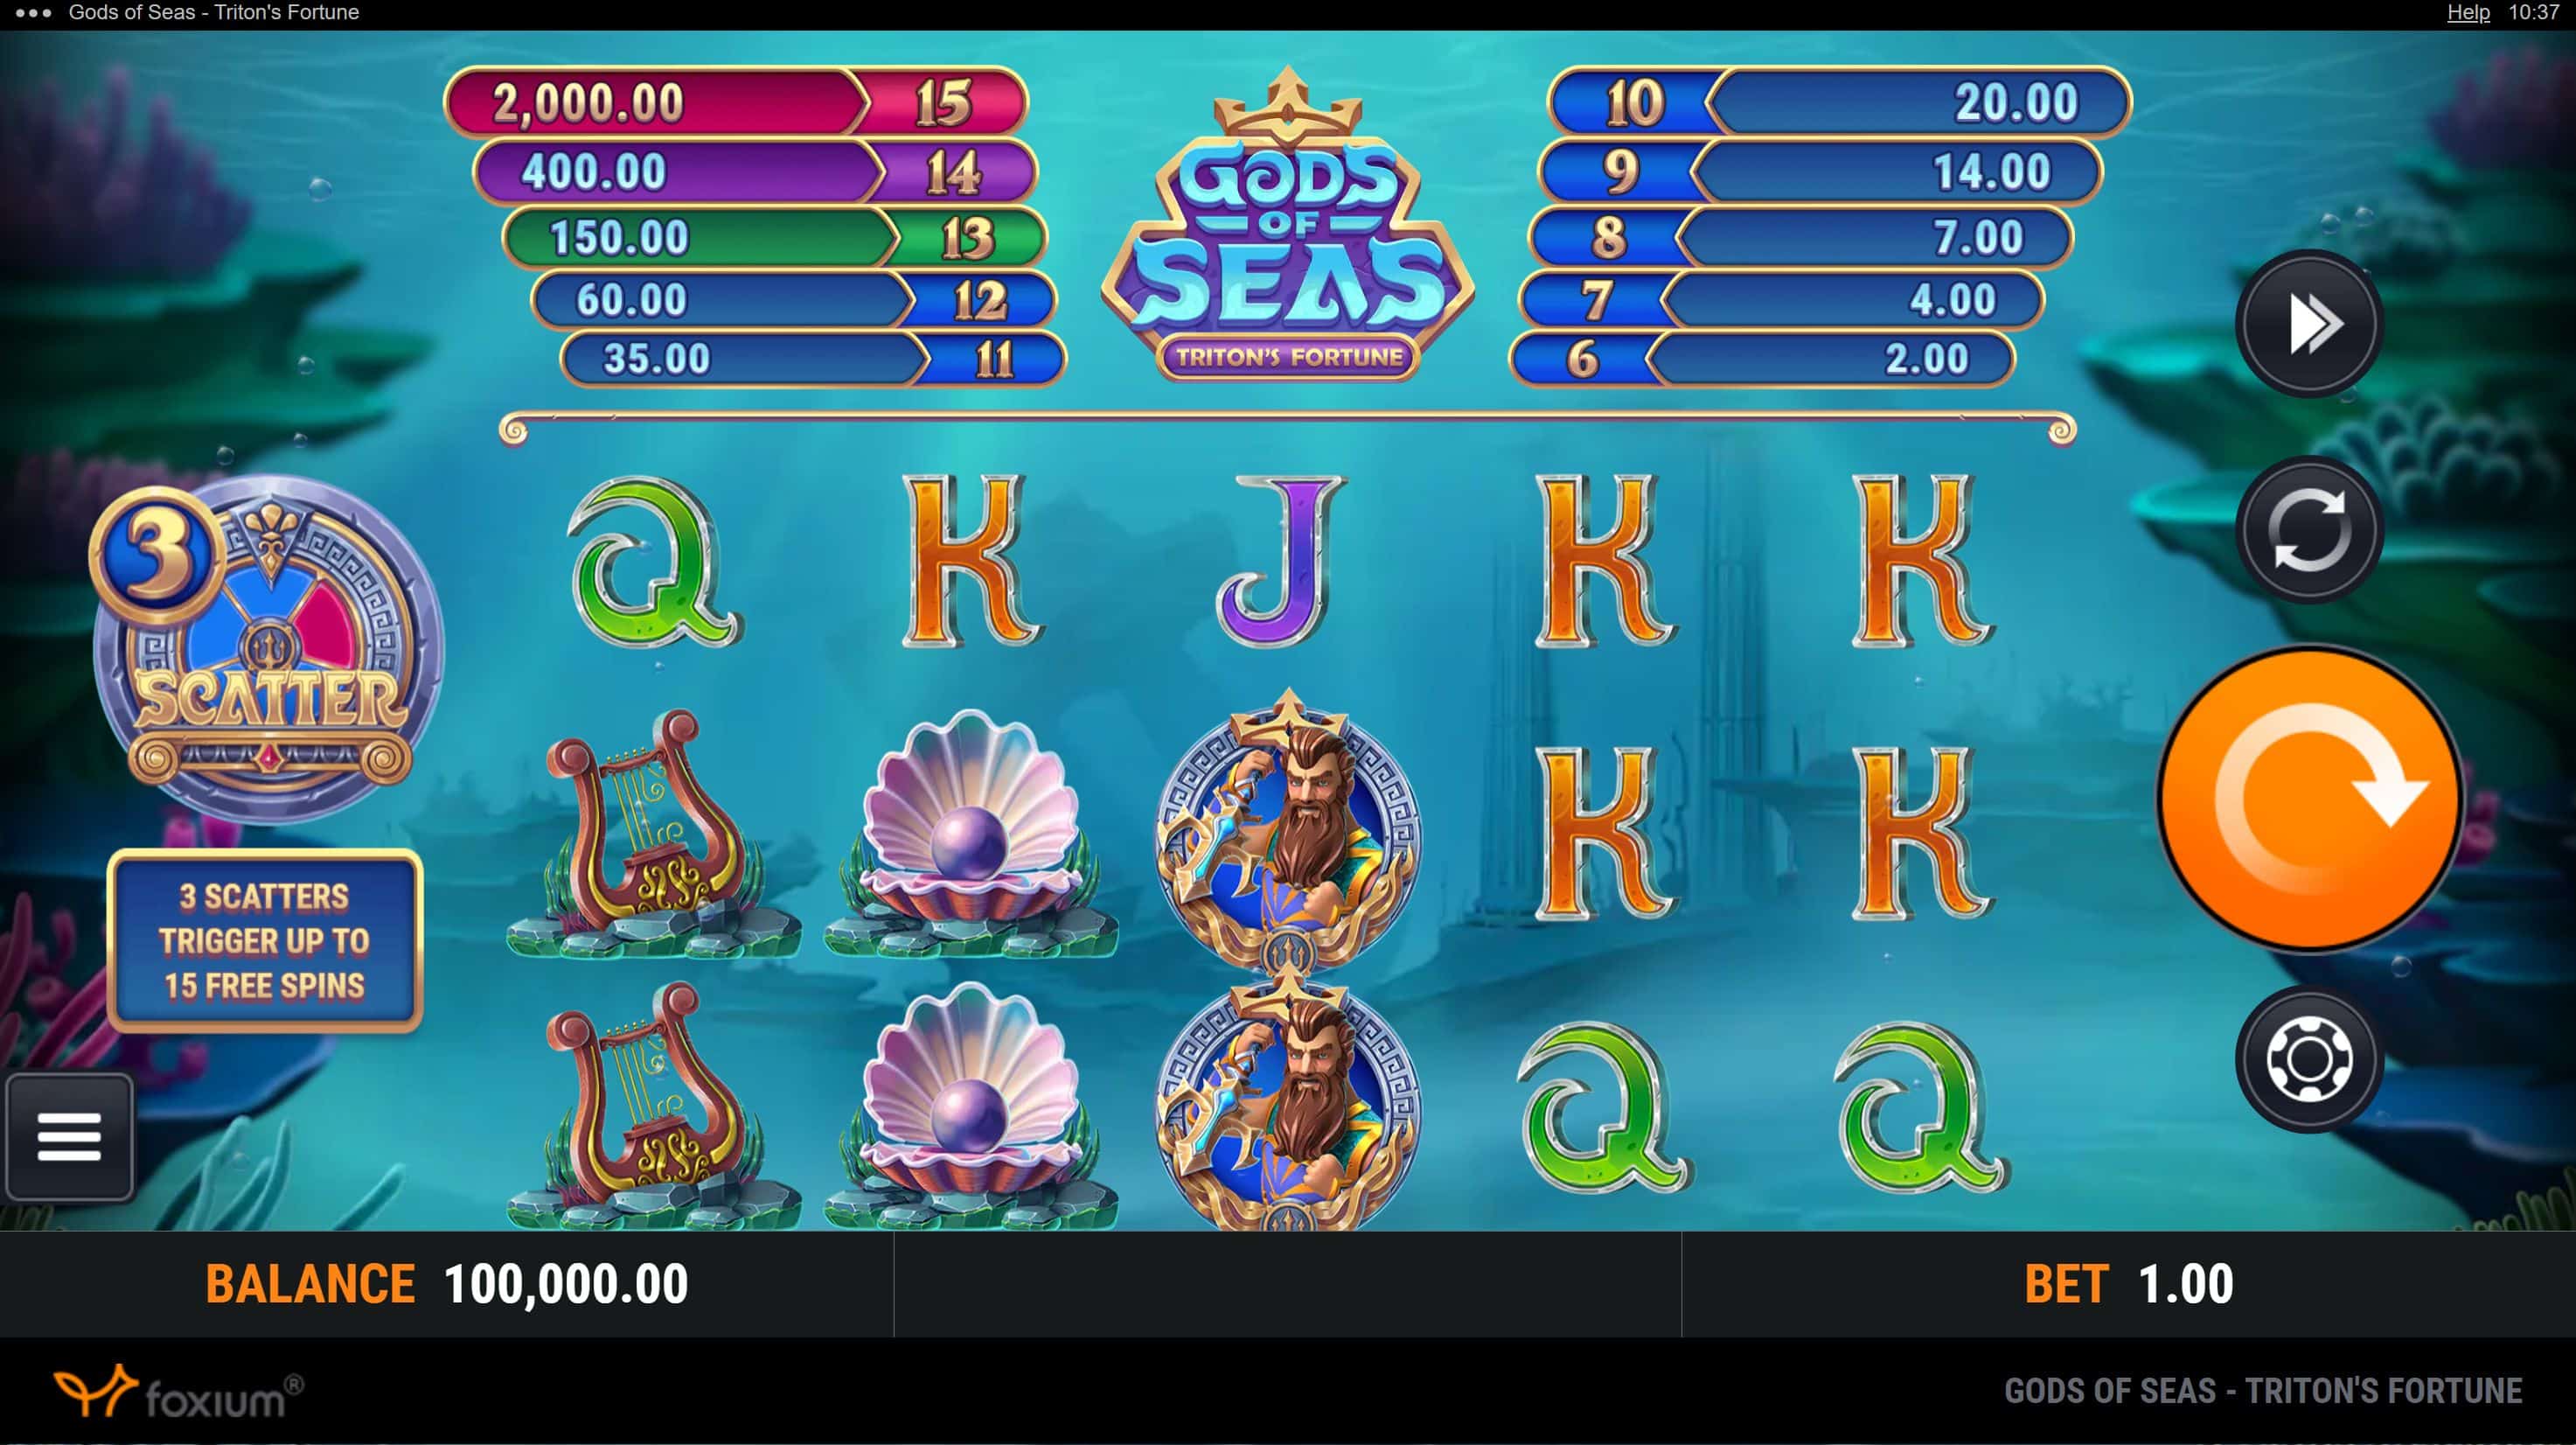 Gods of Seas Tritons Fortune Slot Game Free Play at Casino Ireland 01